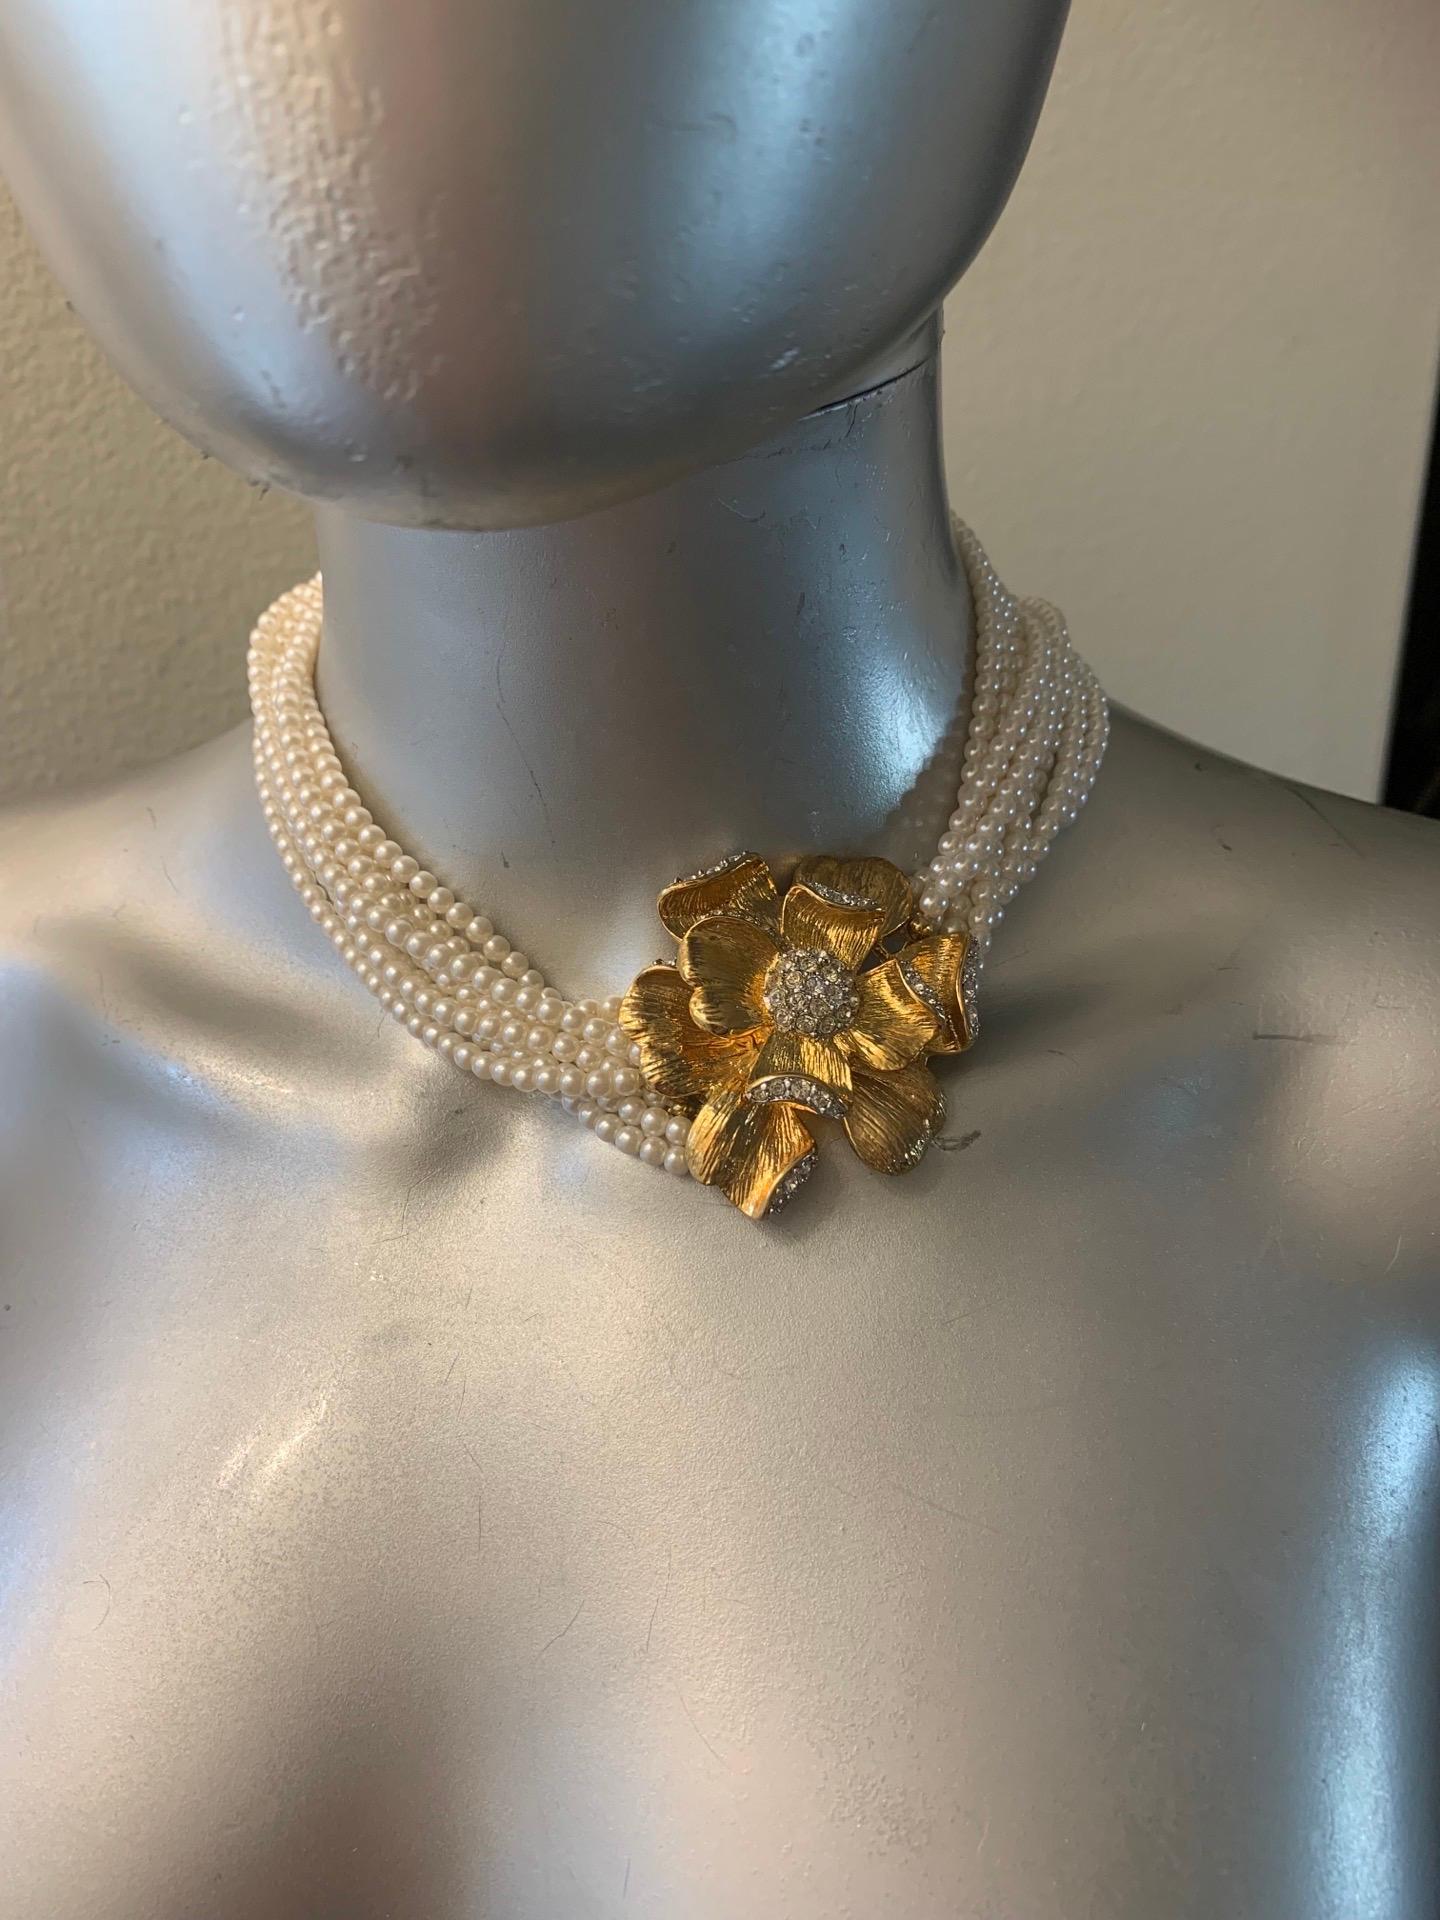 8 strands of faux pearls (the look so real!!!) and a beautiful spring blossum flower in textured gold plate. Rhinestone accents. All by Dynasty TV show designer, Nolan Miller. This chic necklace was part of a collection that included beautiful clip